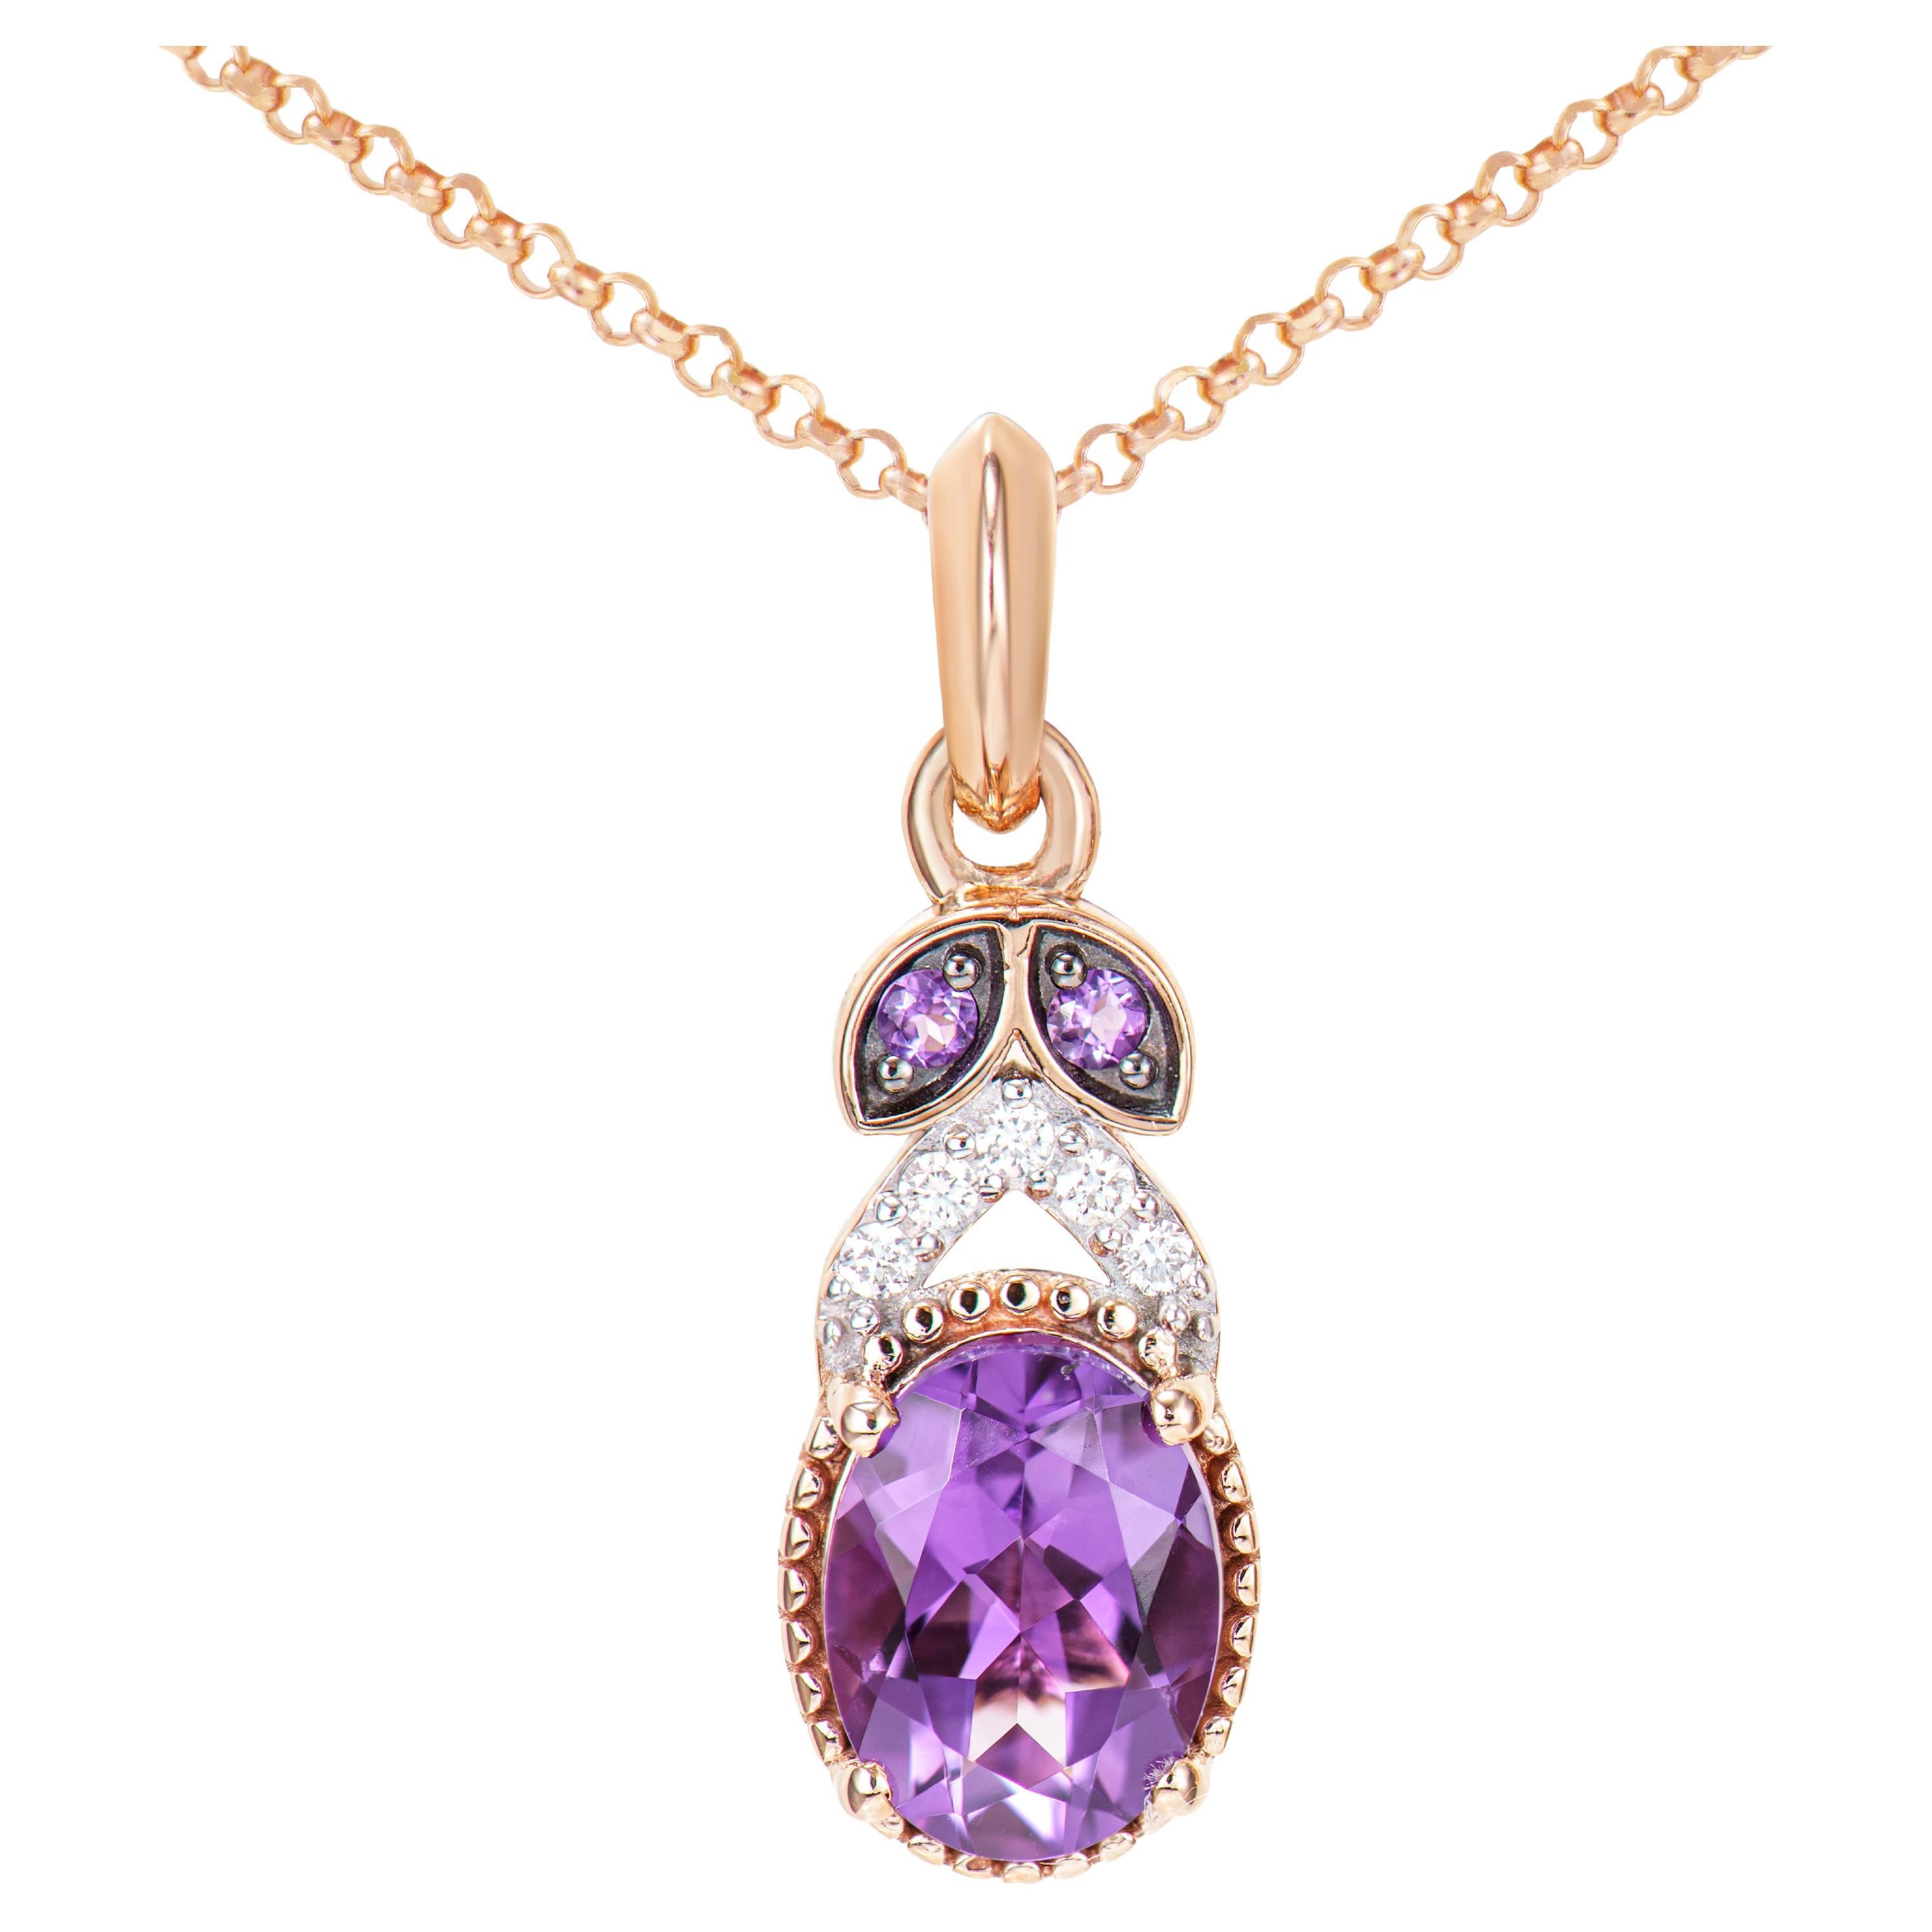 1.02 Carat Amethyst Pendant in 14Karat Rose Gold with White Diamond. For Sale